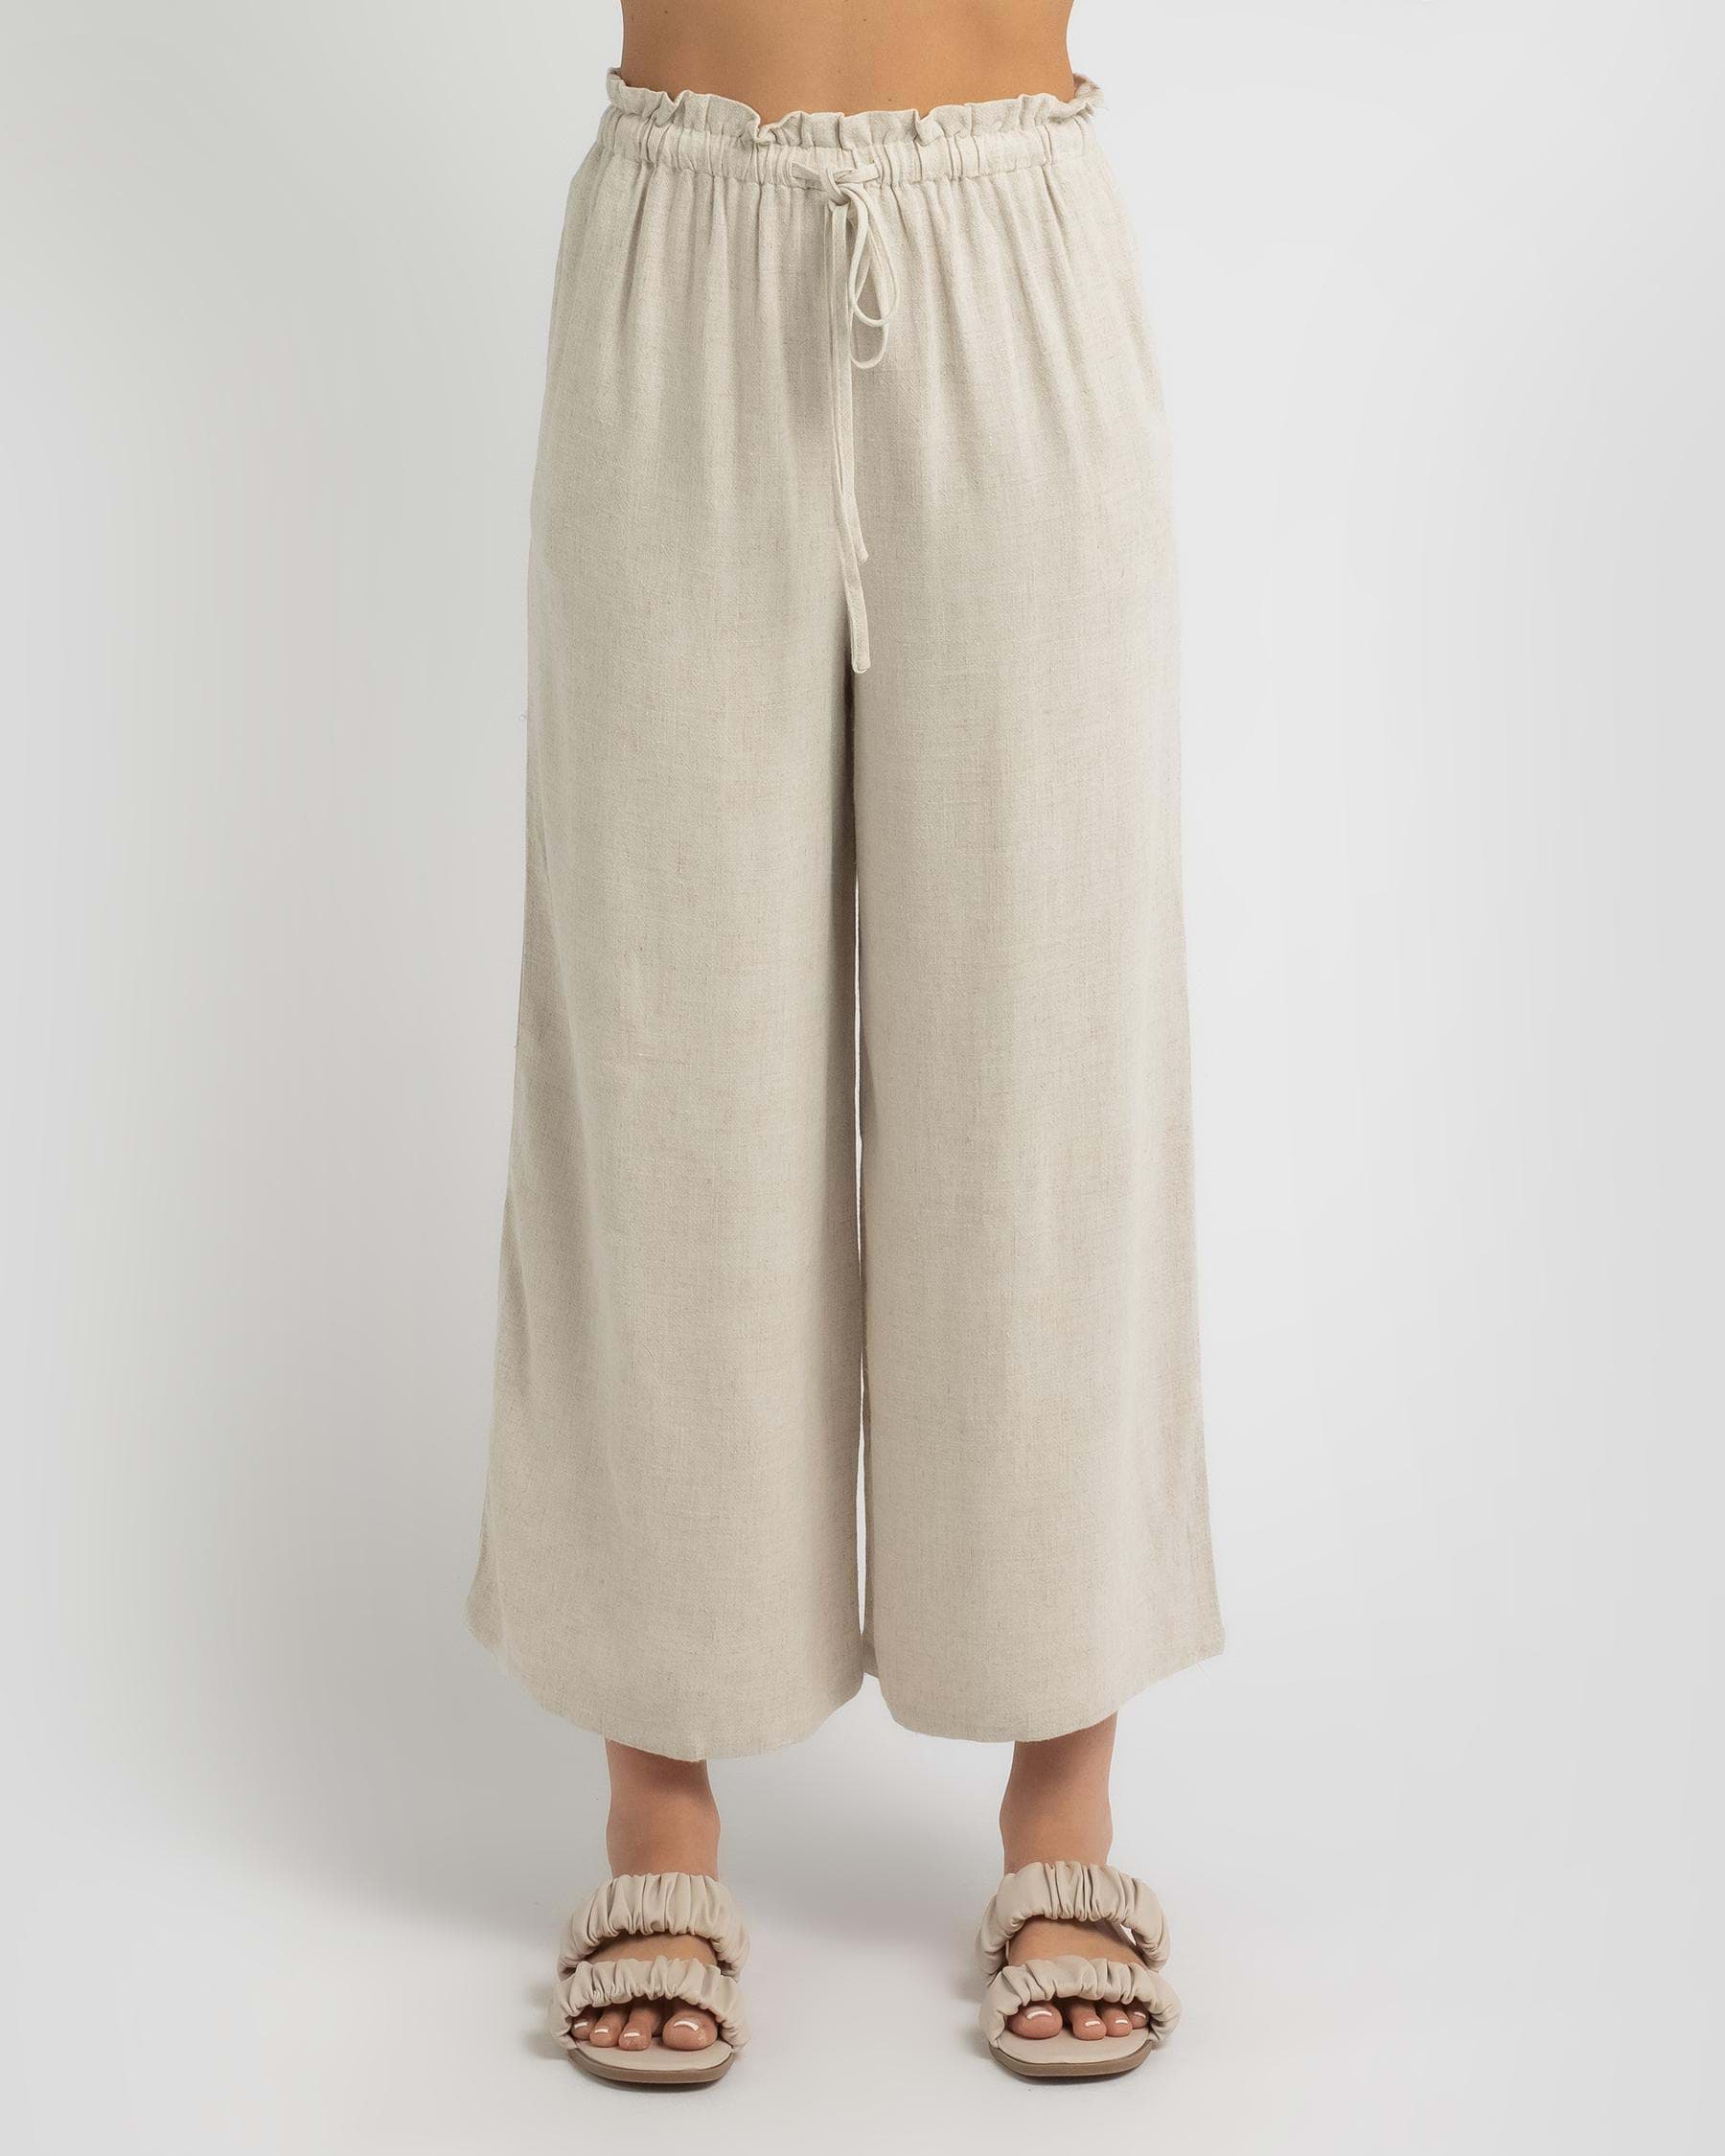 Shop Yours Truly Brielle Beach Pants In Beige - Fast Shipping & Easy ...